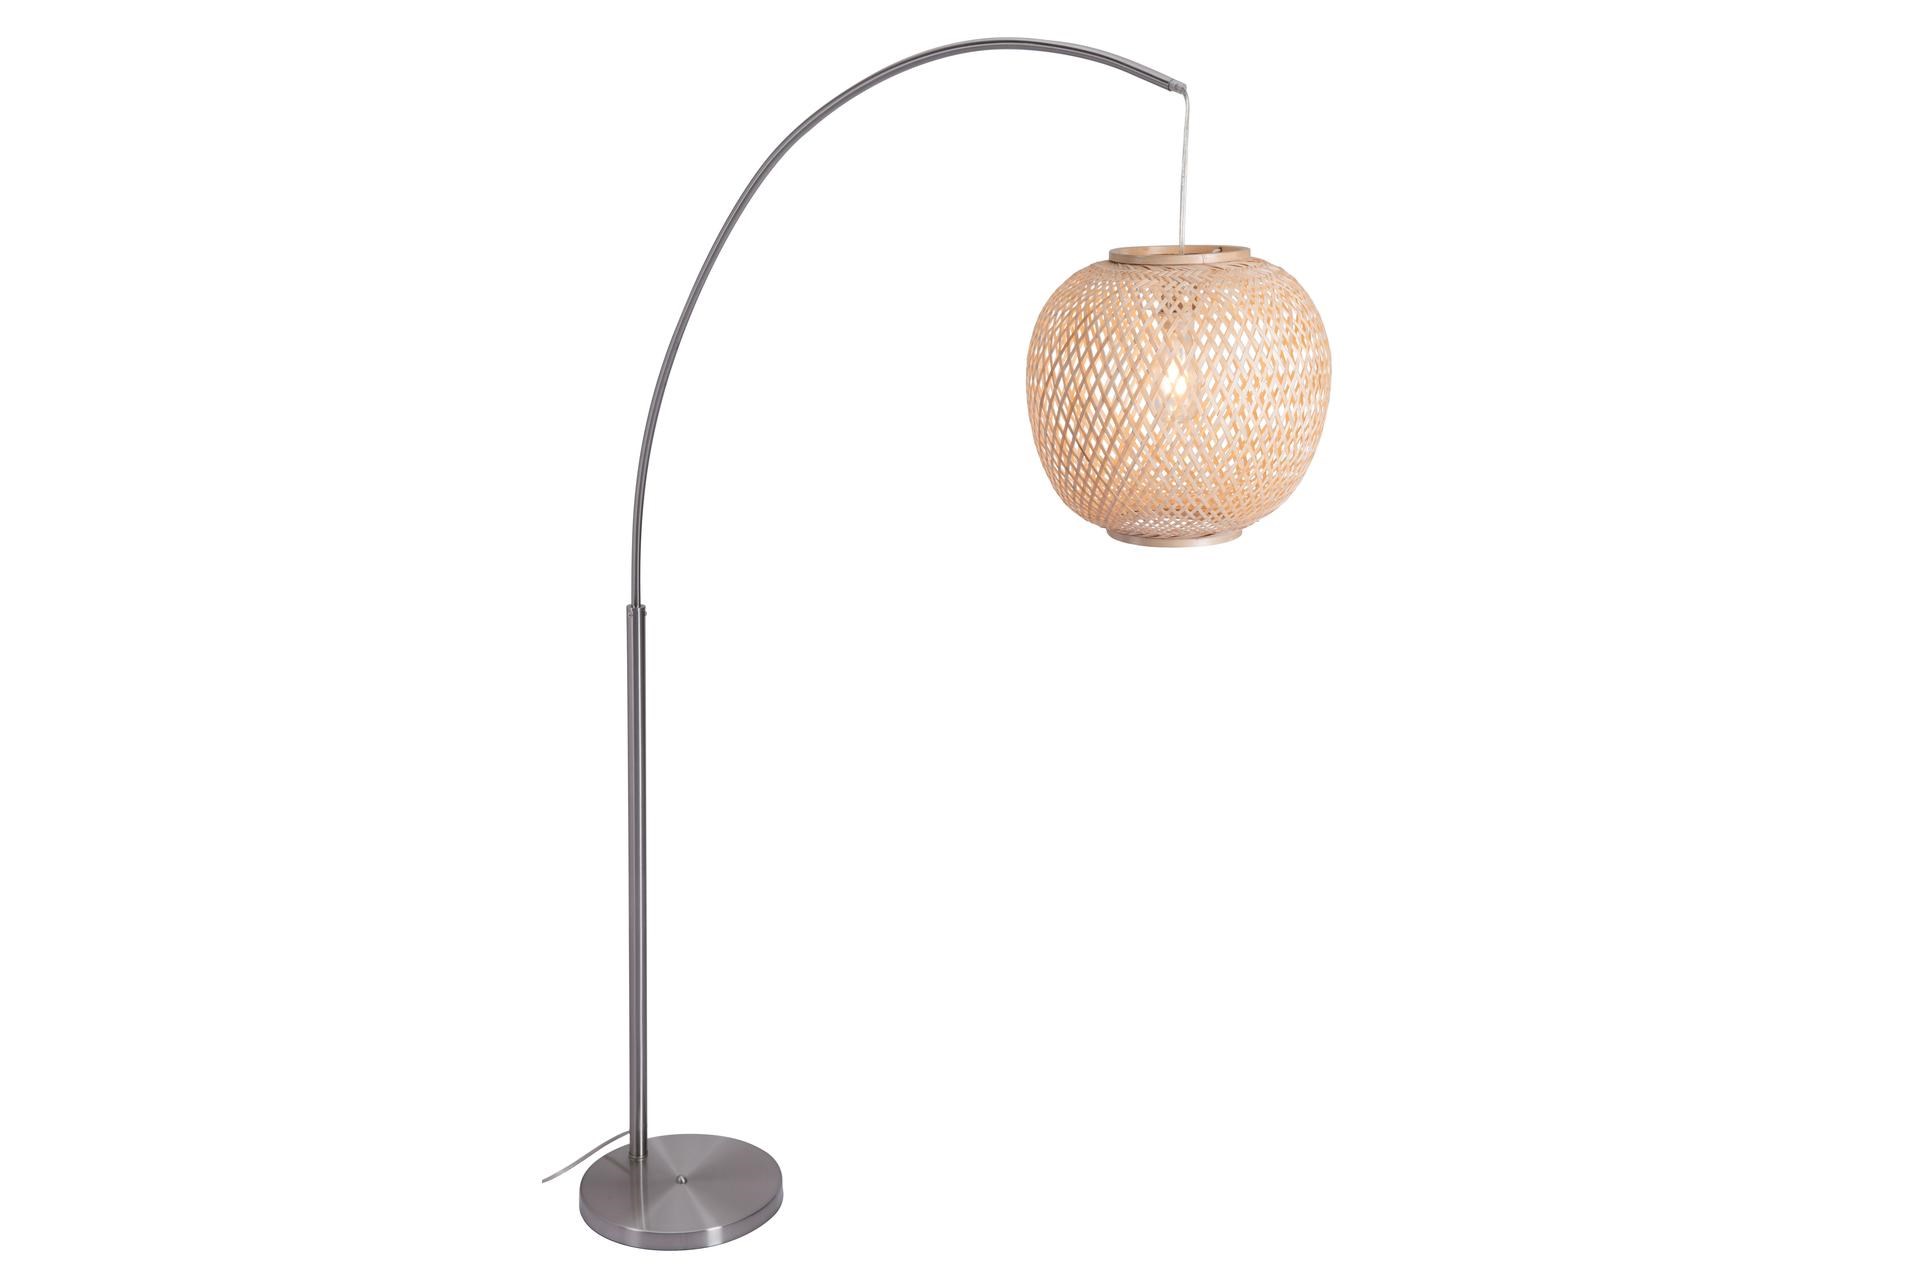 How To Set Up An Arc Floor Lamp